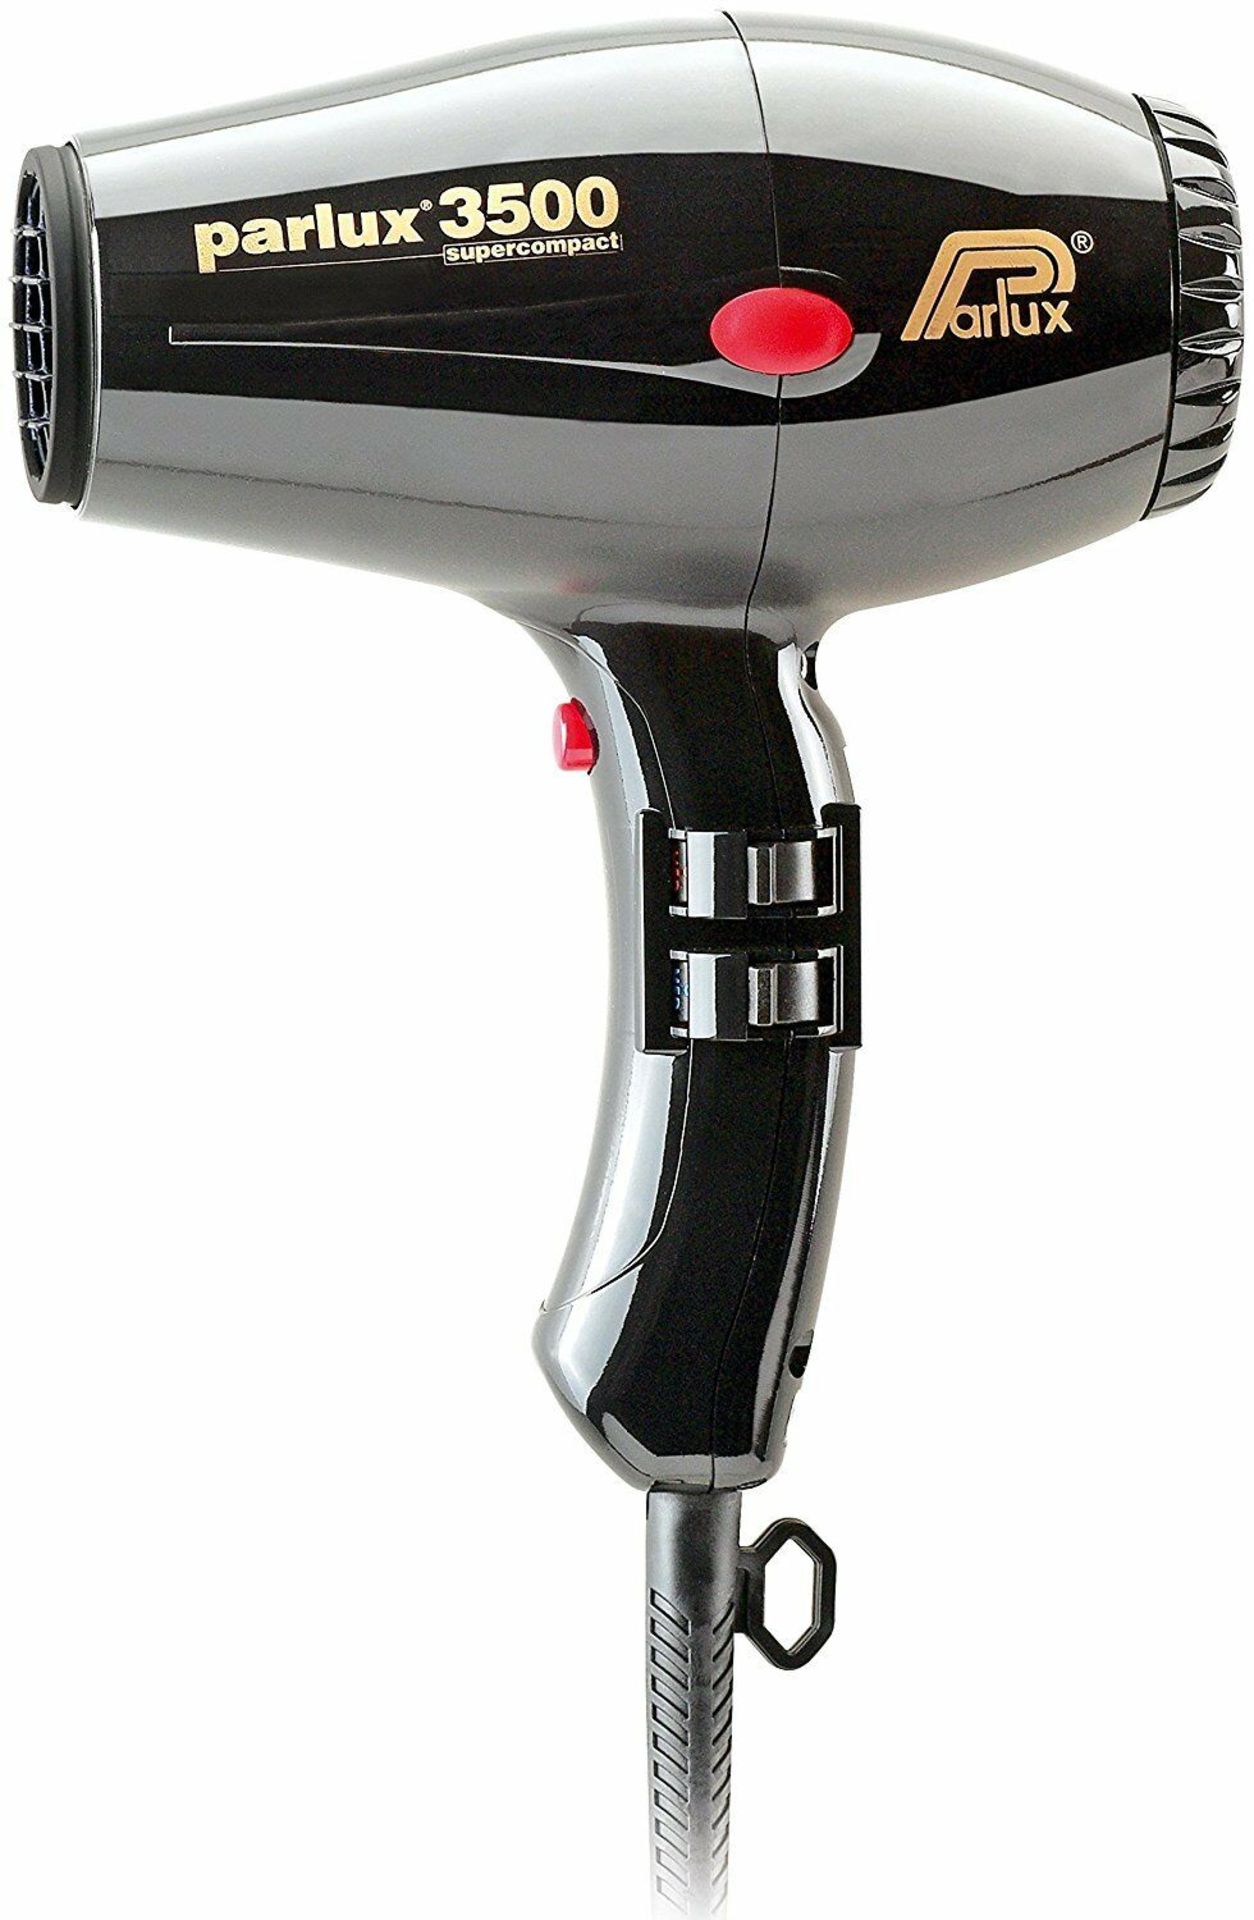 Parlux 3500 Supercompact Hair Dryer Professional Black